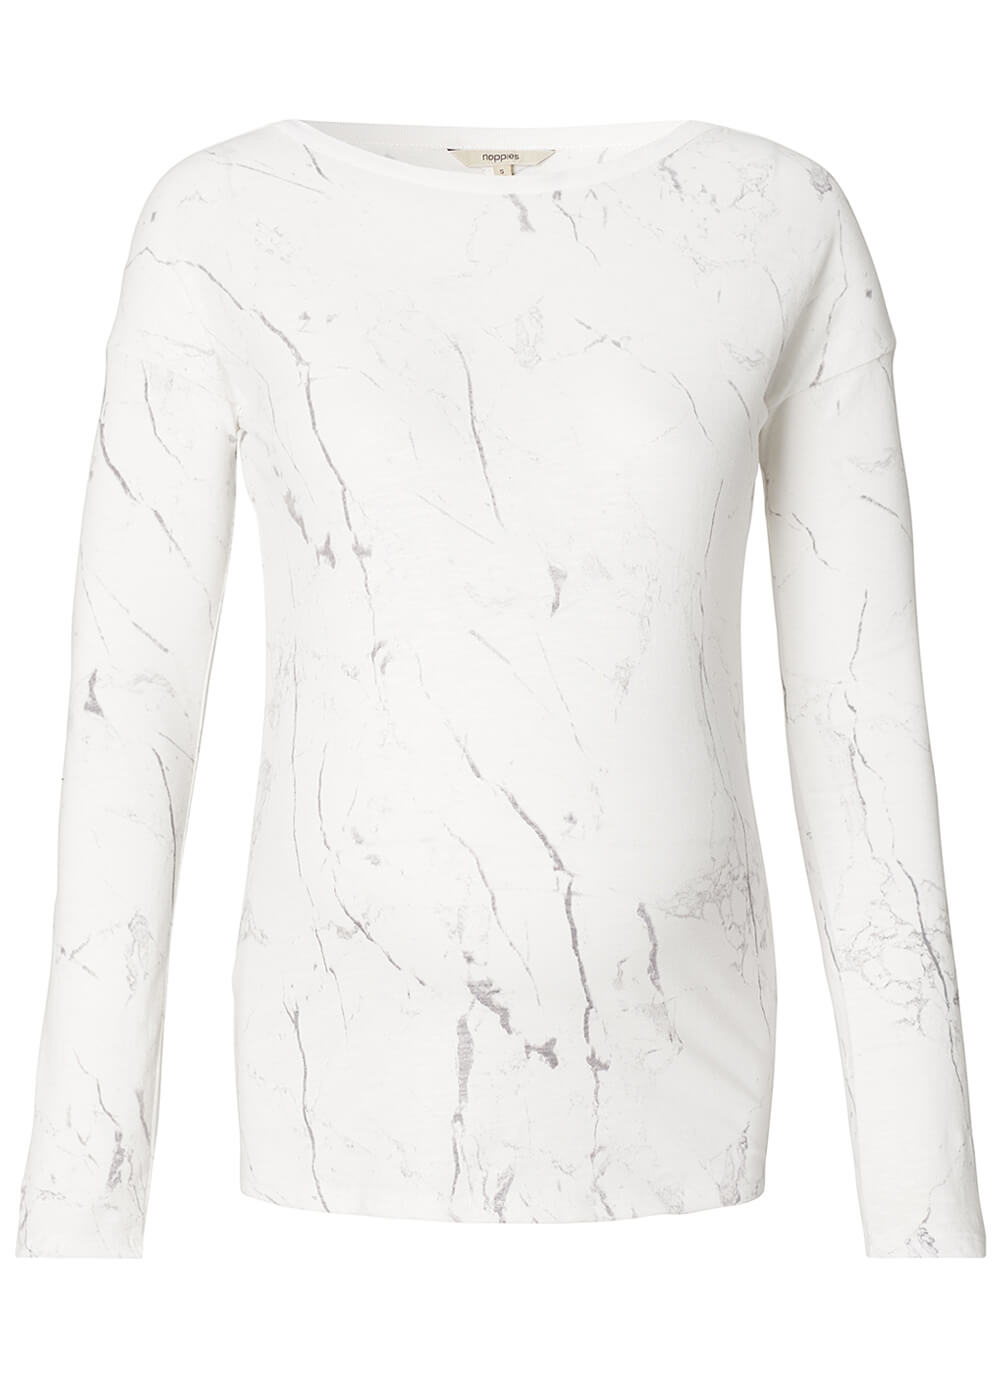 Hedy Long Sleeve Marble Maternity Top by Noppies